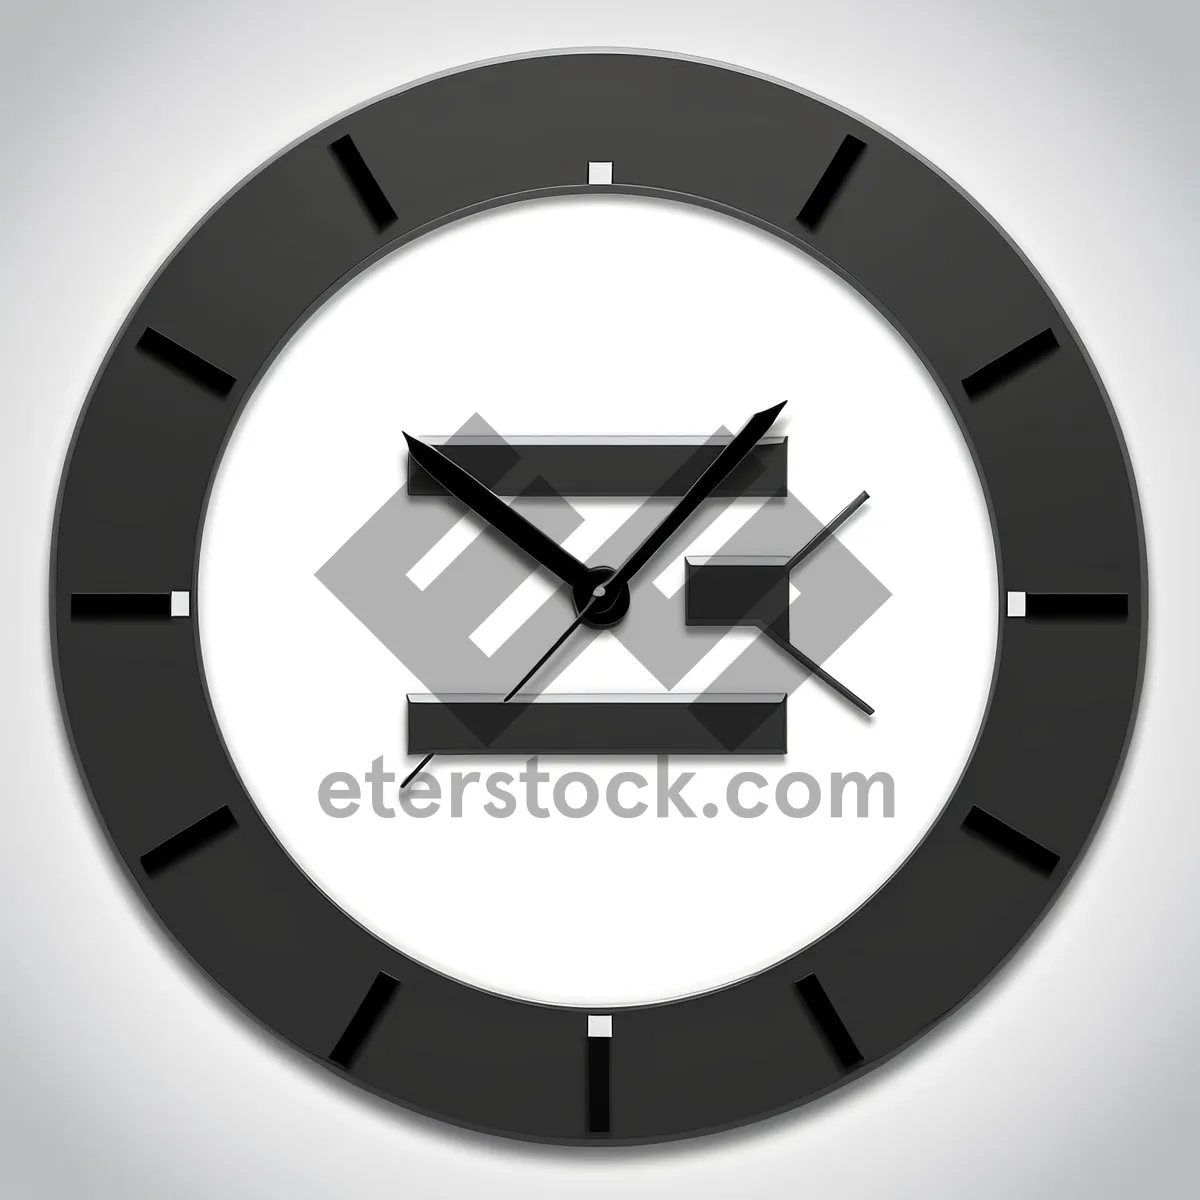 Picture of Timepiece icon with glossy metallic design